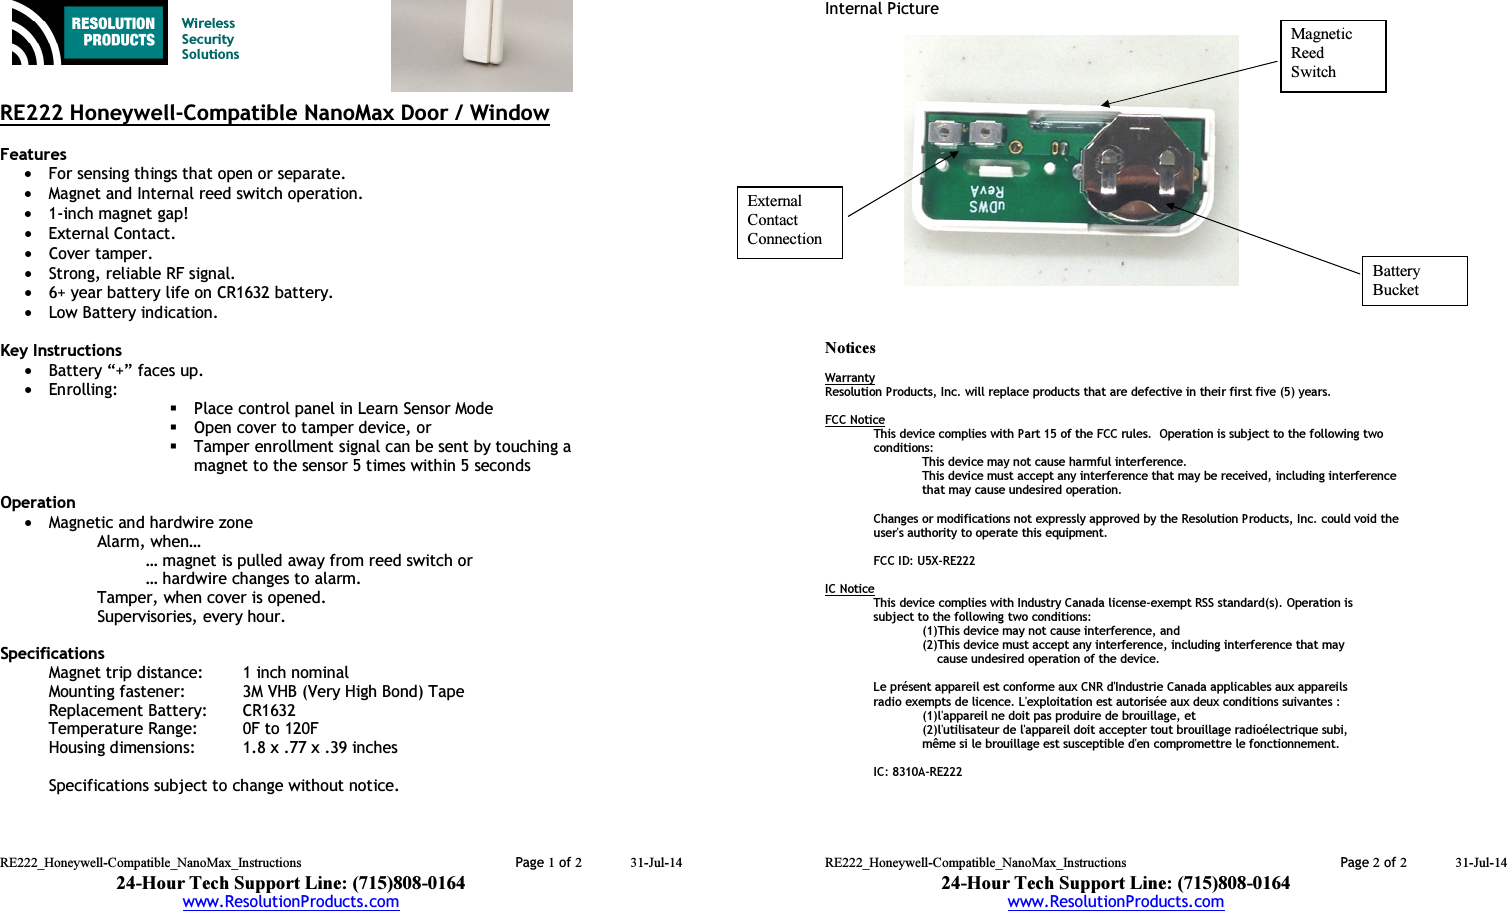 RE222_Honeywell-Compatible_NanoMax_Instructions  Page 1 of 2 31-Jul-14 24-Hour Tech Support Line: (715)808-0164 www.ResolutionProducts.com    Wireless  Security  Solutions   RE222 Honeywell-Compatible NanoMax Door / Window  Features  • For sensing things that open or separate. • Magnet and Internal reed switch operation. • 1-inch magnet gap! • External Contact. • Cover tamper. • Strong, reliable RF signal. • 6+ year battery life on CR1632 battery. • Low Battery indication.  Key Instructions • Battery “+” faces up. • Enrolling:   Place control panel in Learn Sensor Mode  Open cover to tamper device, or  Tamper enrollment signal can be sent by touching a magnet to the sensor 5 times within 5 seconds  Operation  • Magnetic and hardwire zone  Alarm, when… … magnet is pulled away from reed switch or … hardwire changes to alarm. Tamper, when cover is opened. Supervisories, every hour.  Specifications Magnet trip distance:  1 inch nominal Mounting fastener:  3M VHB (Very High Bond) Tape Replacement Battery:  CR1632 Temperature Range:  0F to 120F Housing dimensions:  1.8 x .77 x .39 inches  Specifications subject to change without notice.   RE222_Honeywell-Compatible_NanoMax_Instructions  Page 2 of 2 31-Jul-14 24-Hour Tech Support Line: (715)808-0164 www.ResolutionProducts.com  Internal Picture                  Notices  Warranty Resolution Products, Inc. will replace products that are defective in their first five (5) years.  FCC Notice This device complies with Part 15 of the FCC rules.  Operation is subject to the following two conditions: This device may not cause harmful interference. This device must accept any interference that may be received, including interference that may cause undesired operation.   Changes or modifications not expressly approved by the Resolution Products, Inc. could void the user&apos;s authority to operate this equipment.  FCC ID: U5X-RE222  IC Notice This device complies with Industry Canada license-exempt RSS standard(s). Operation is subject to the following two conditions:    (1)This device may not cause interference, and    (2)This device must accept any interference, including interference that may           cause undesired operation of the device.  Le présent appareil est conforme aux CNR d&apos;Industrie Canada applicables aux appareils radio exempts de licence. L&apos;exploitation est autorisée aux deux conditions suivantes :    (1)l&apos;appareil ne doit pas produire de brouillage, et    (2)l&apos;utilisateur de l&apos;appareil doit accepter tout brouillage radioélectrique subi,    même si le brouillage est susceptible d&apos;en compromettre le fonctionnement.   IC: 8310A-RE222 External  Contact  Connection Magnetic Reed  Switch Battery  Bucket 